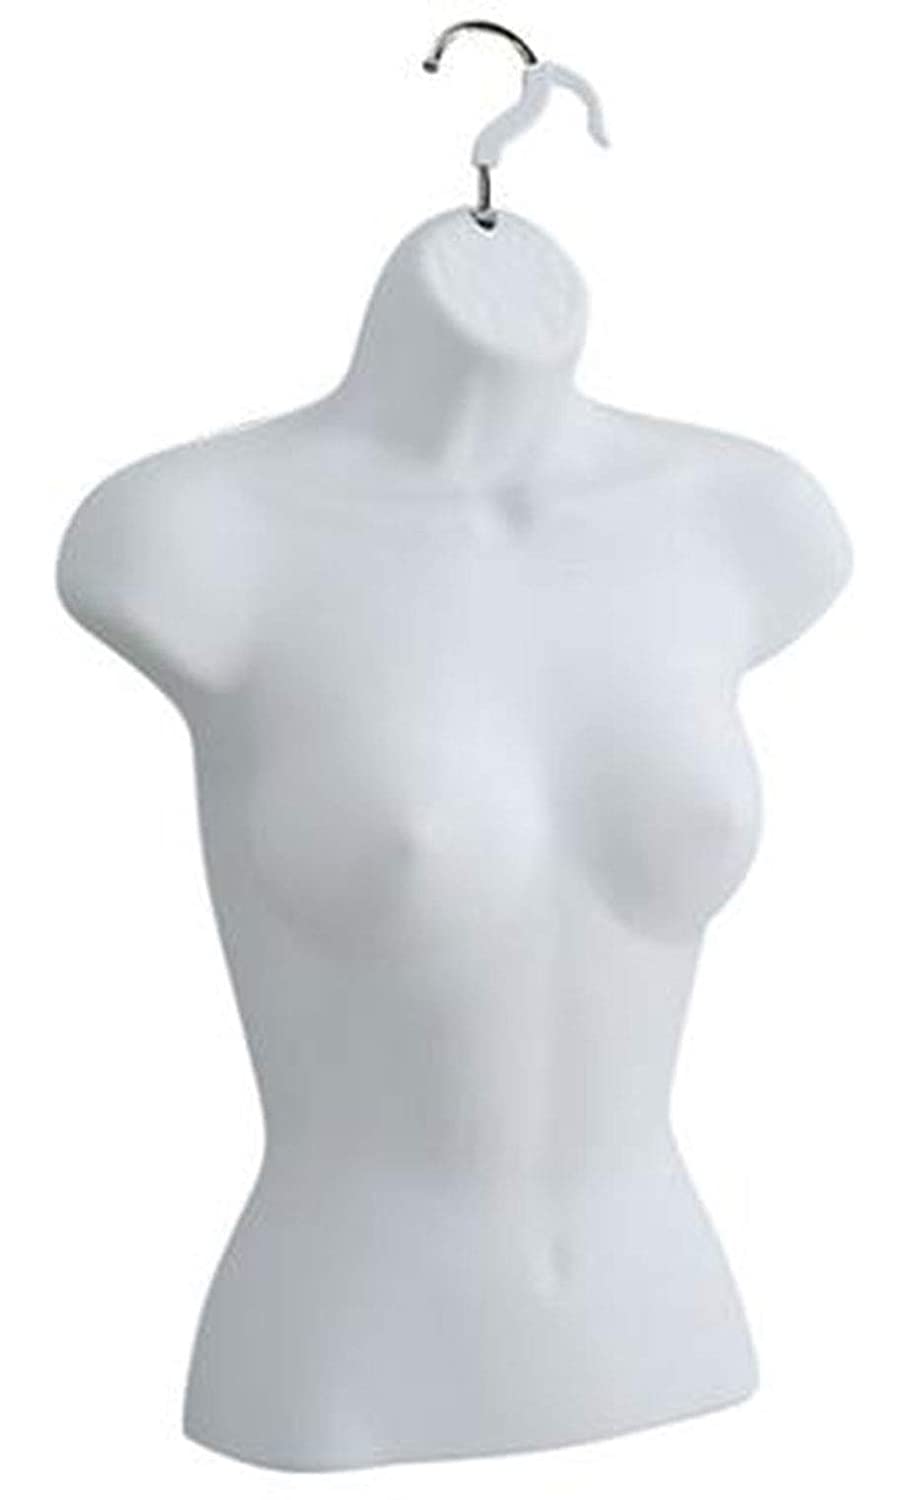 Female Torso Mannequin with Hanging Hook